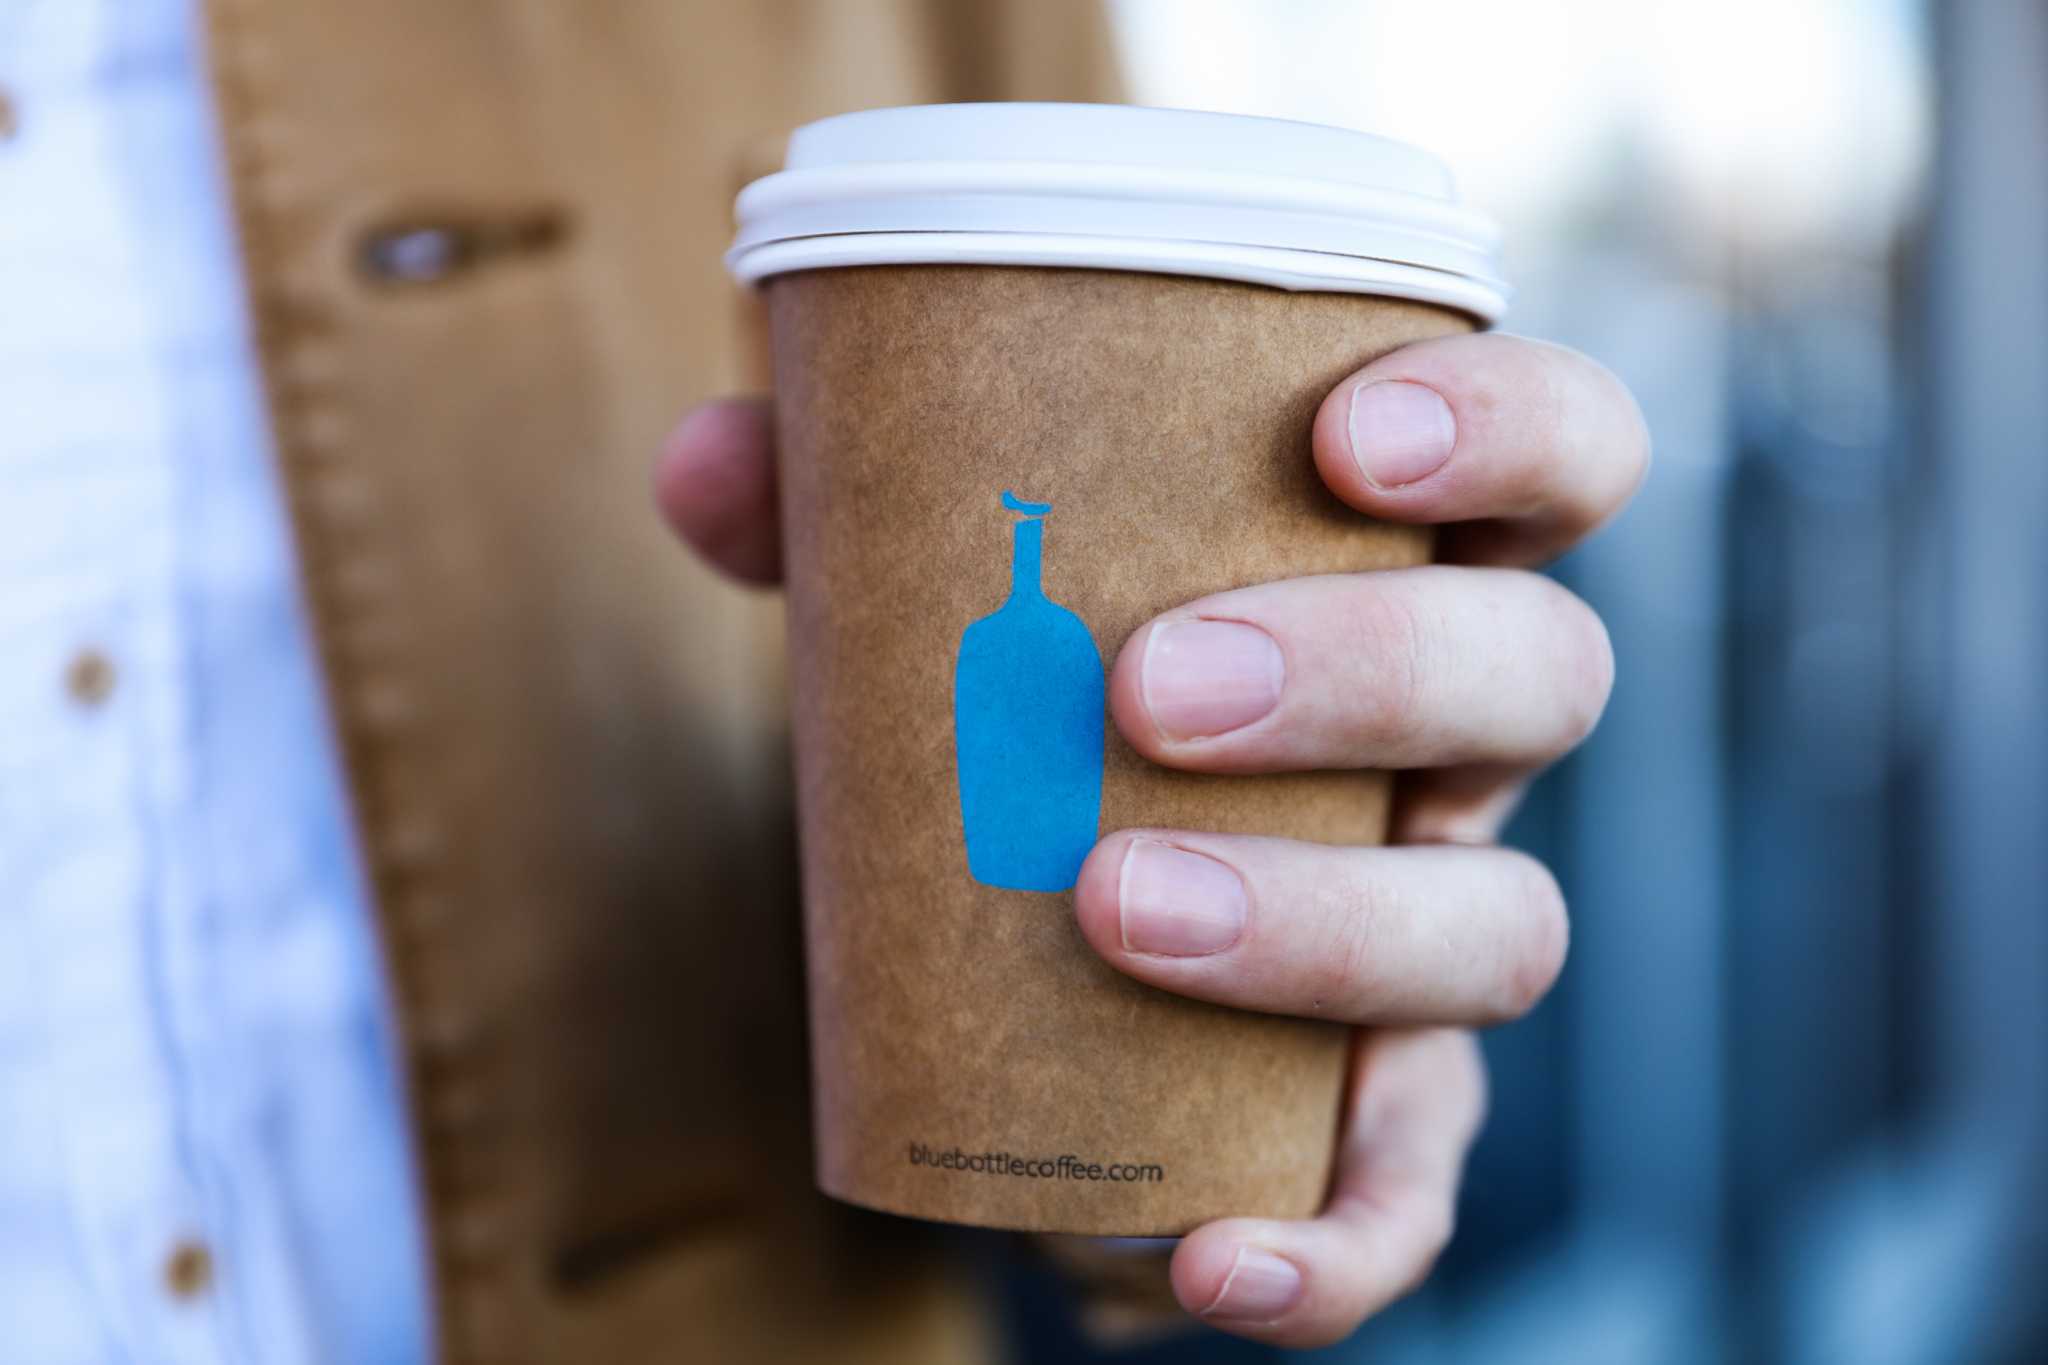 Blue Bottle Coffee Plans to Eliminate Cups and Bags From Two Bay Area Cafes  - Eater SF